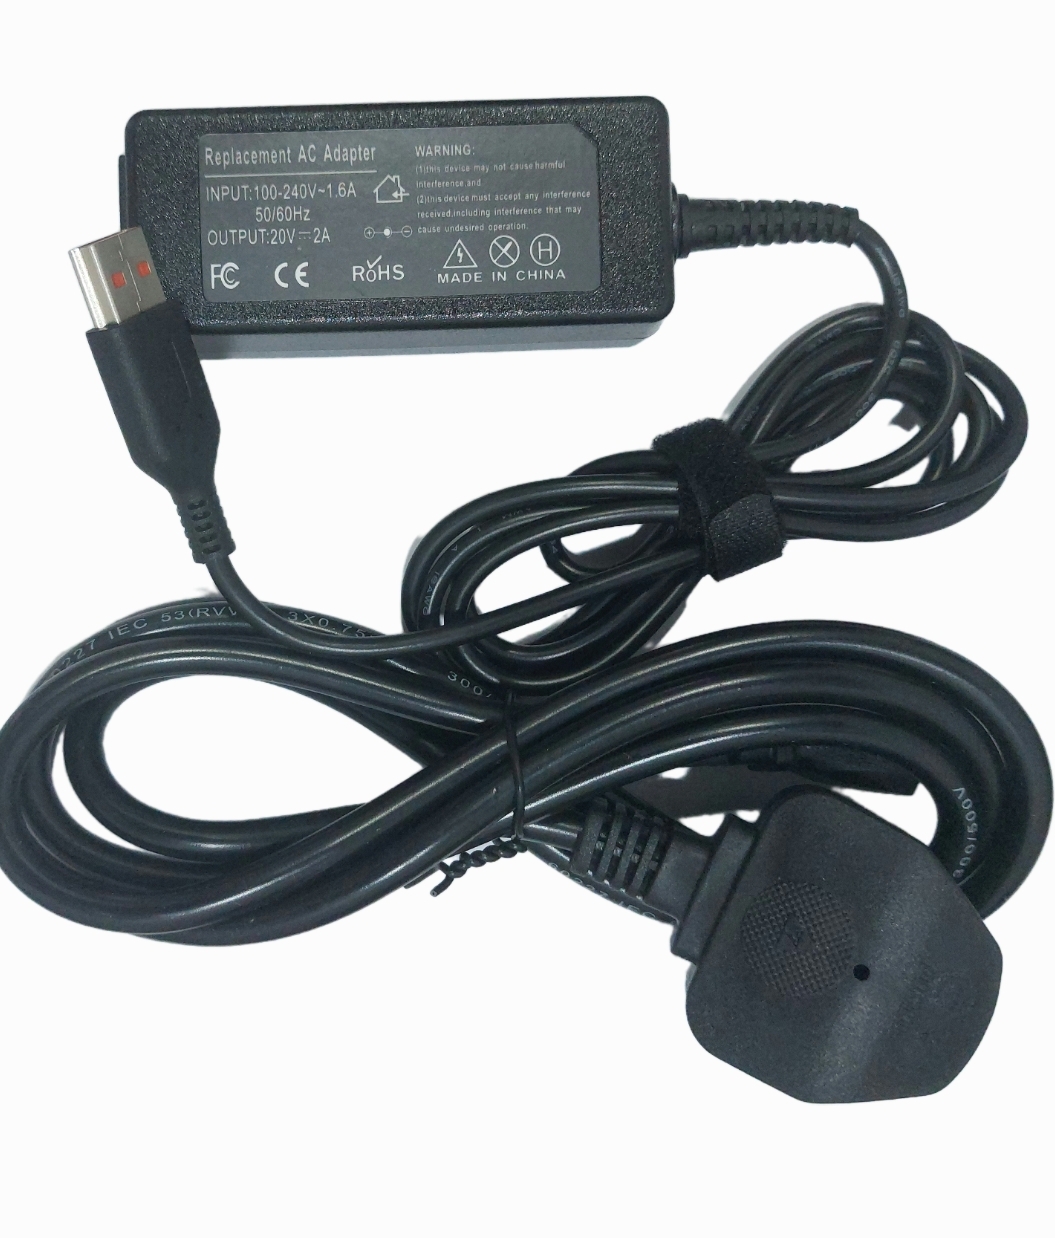 Lenovo Yoga 3 Pro Charger AC Adapter Power Supply